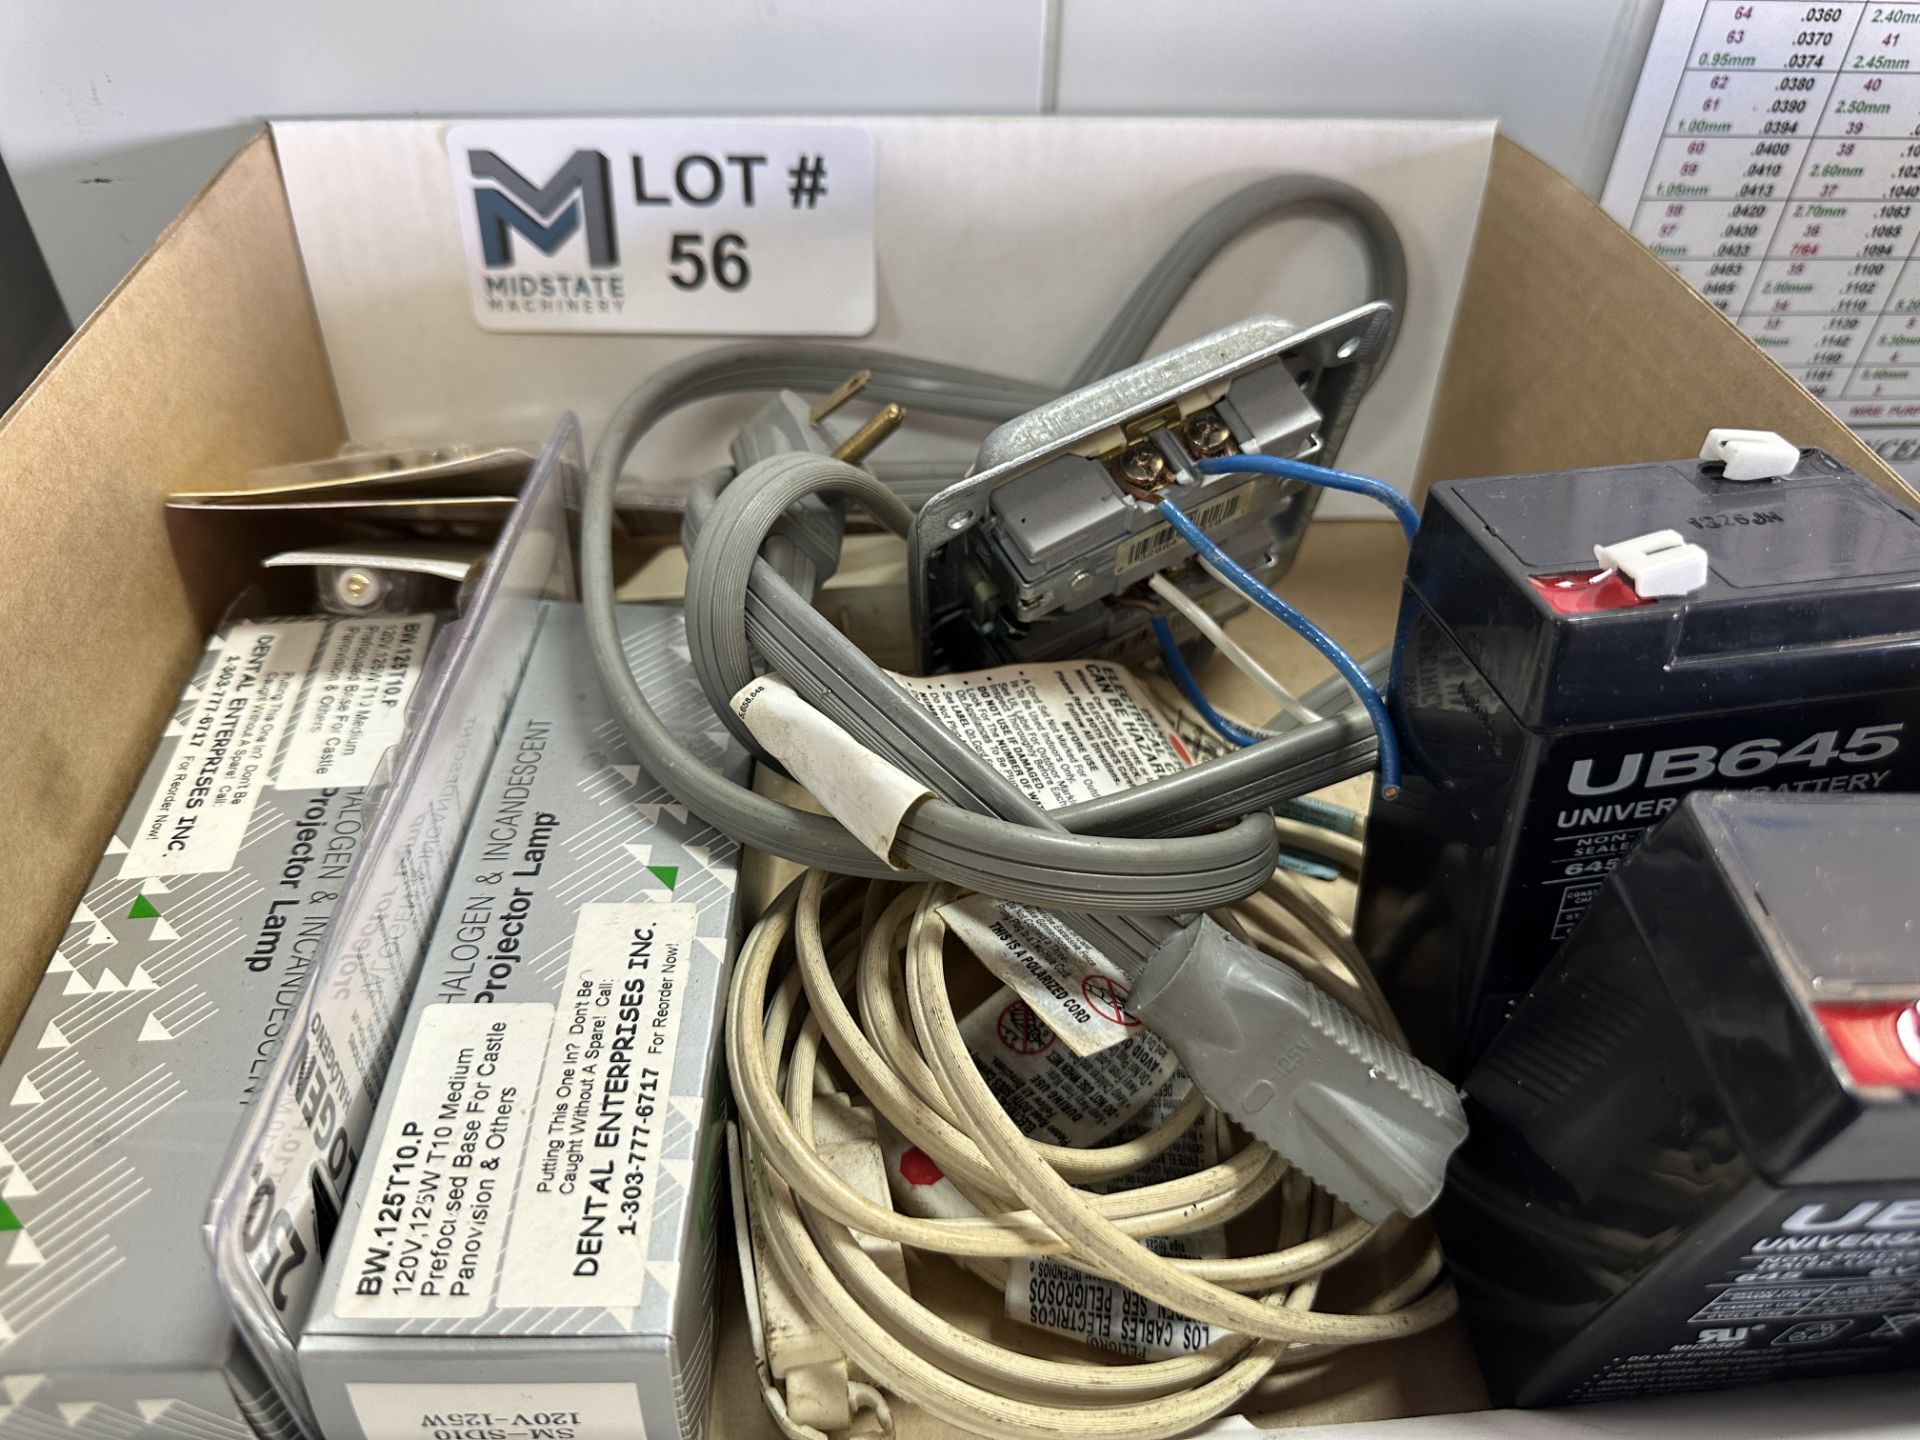 Misc. Electric Cords, Batteries & Bulbs